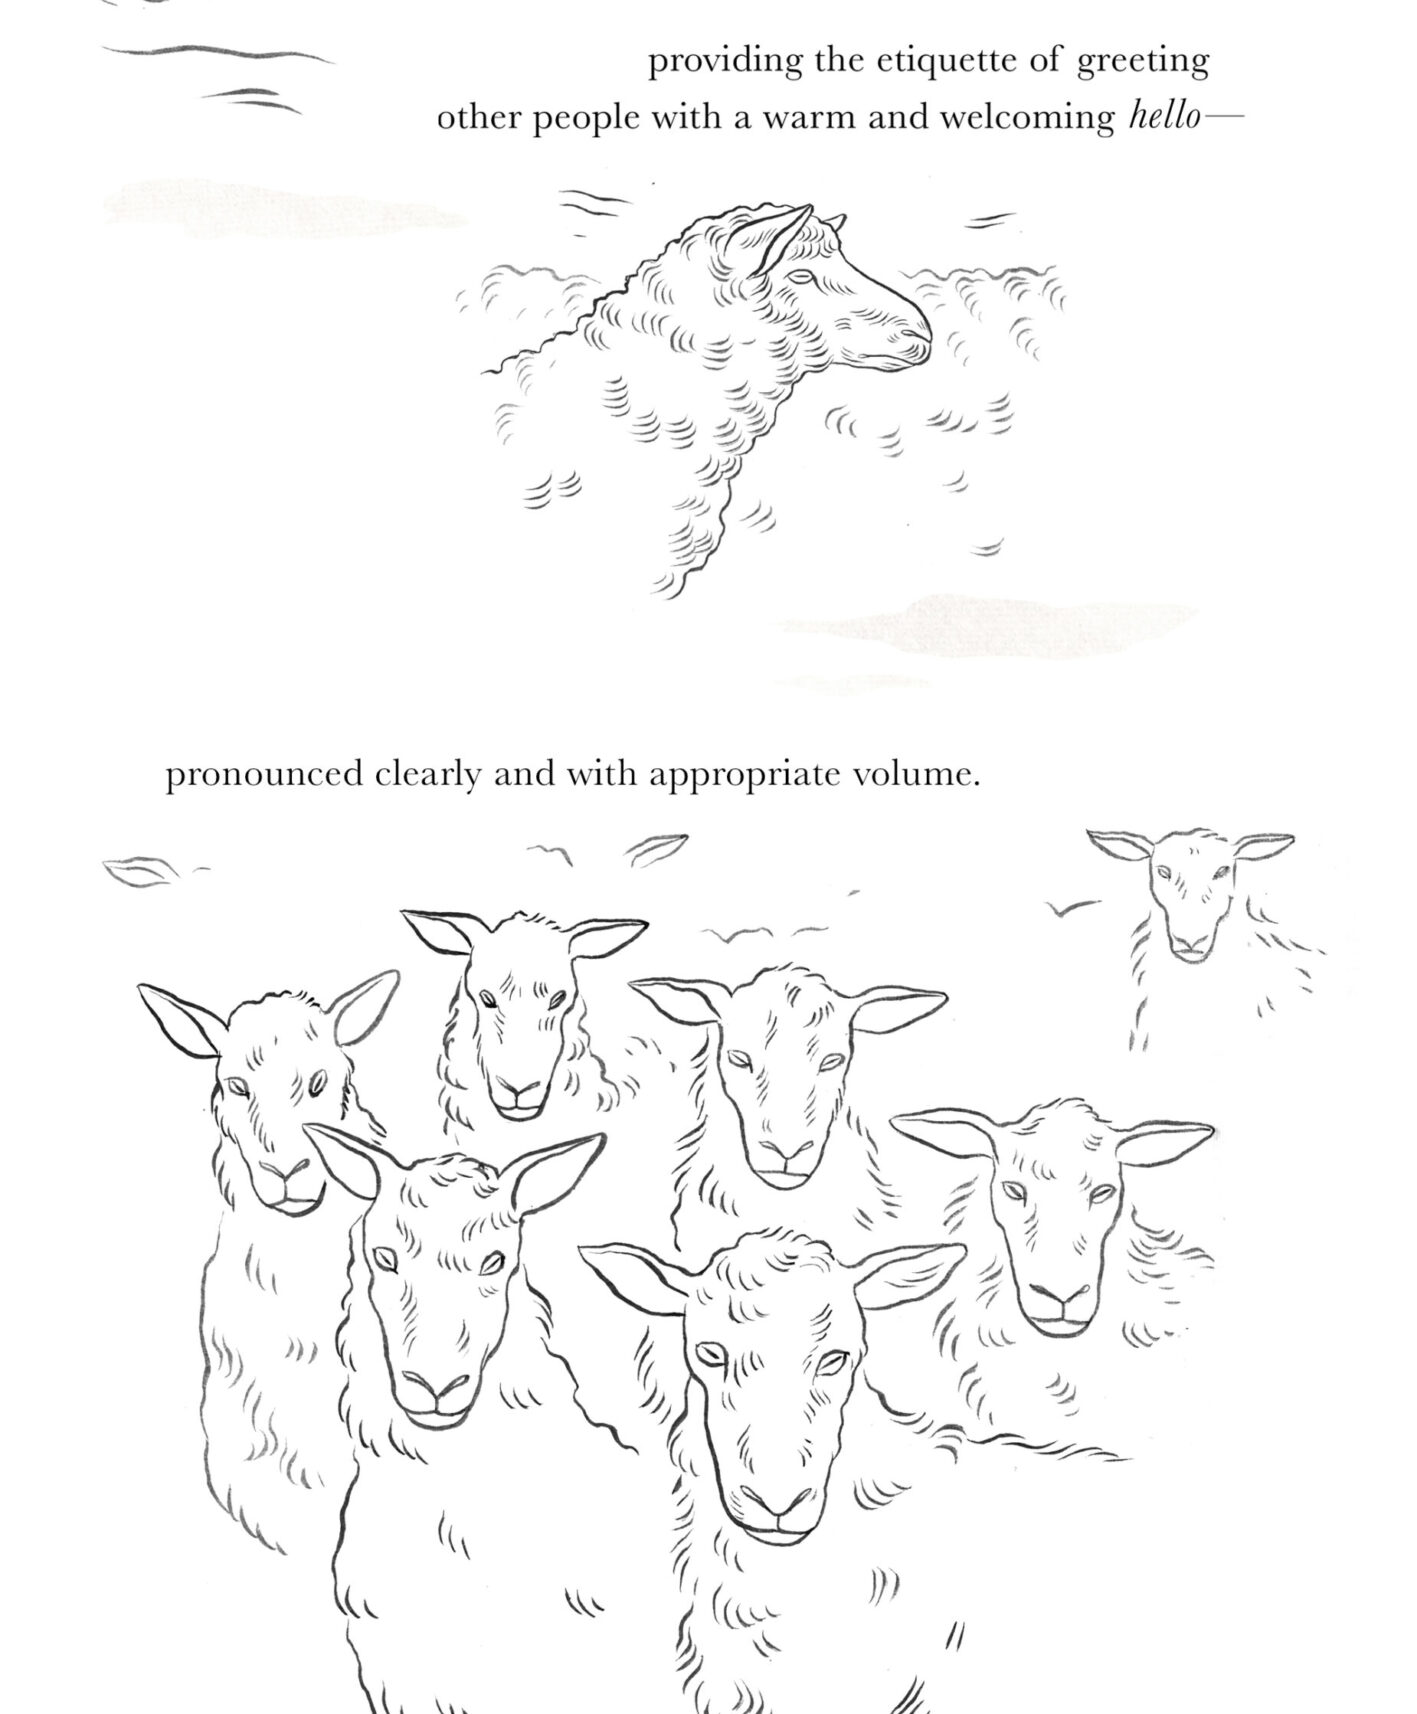 A sheep stares to the right. Then a flock of sheep stare straight at the reader. Text reads: providing the etiquette of greeting / other people with a warm and welcoming hello— / pronounced clearly and with appropriate volume.